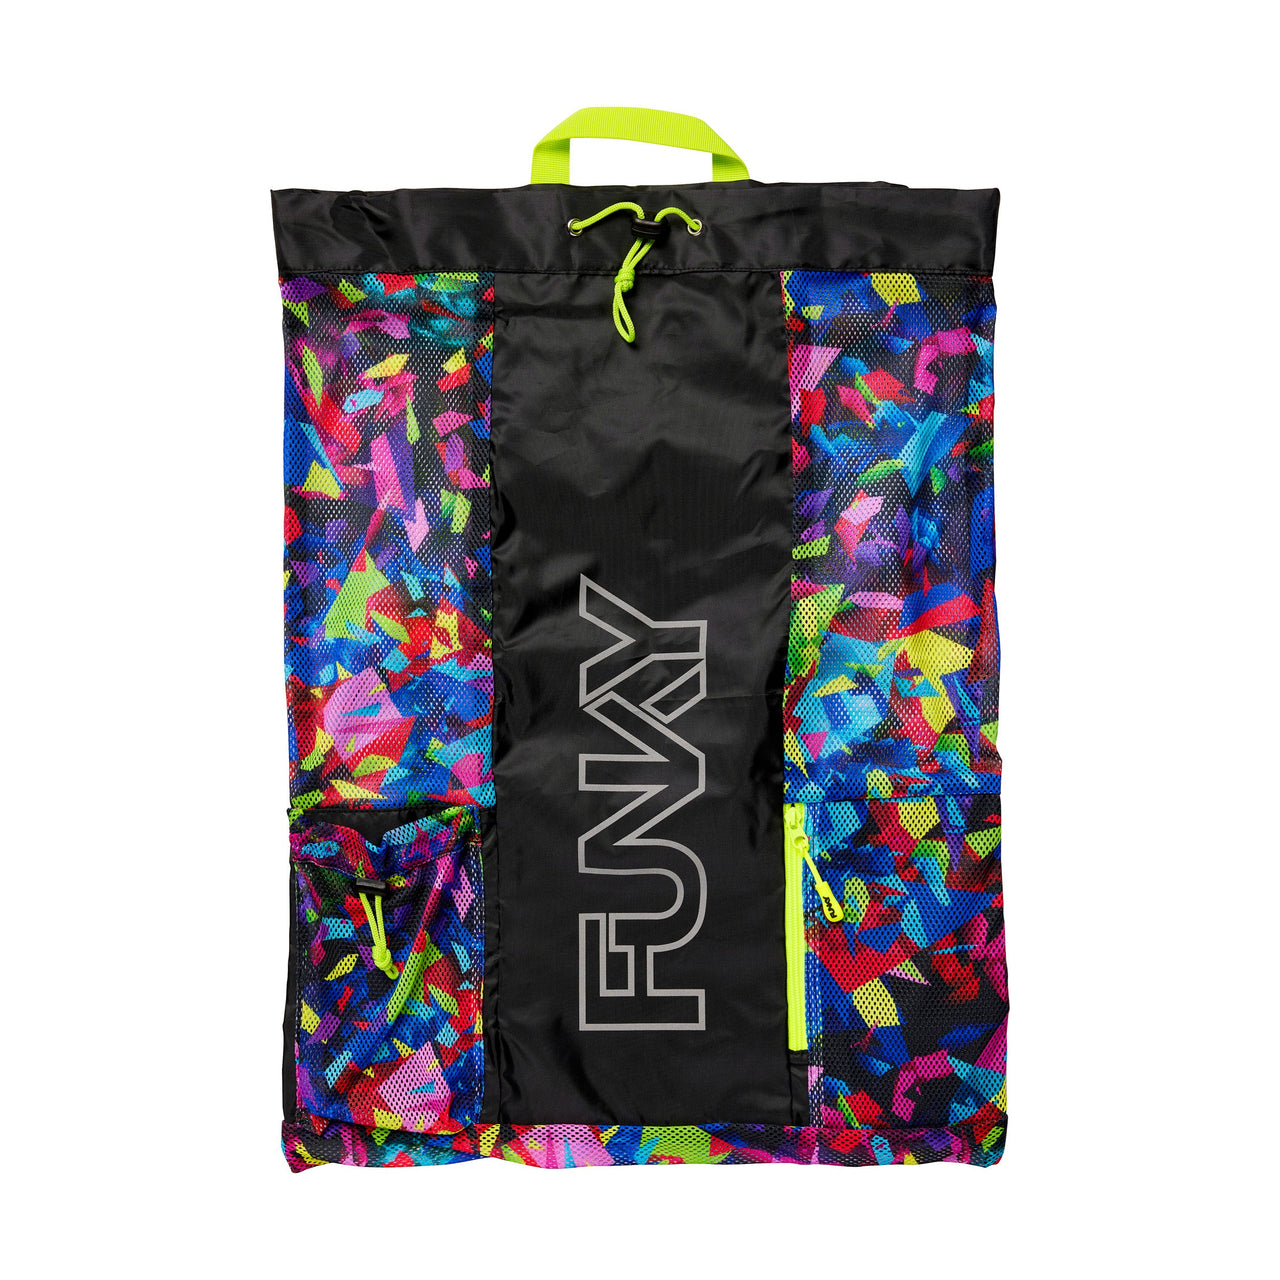 FUNKY TRUNKS DESTROYER GEAR UP MESH BACKPACK - Multicolour